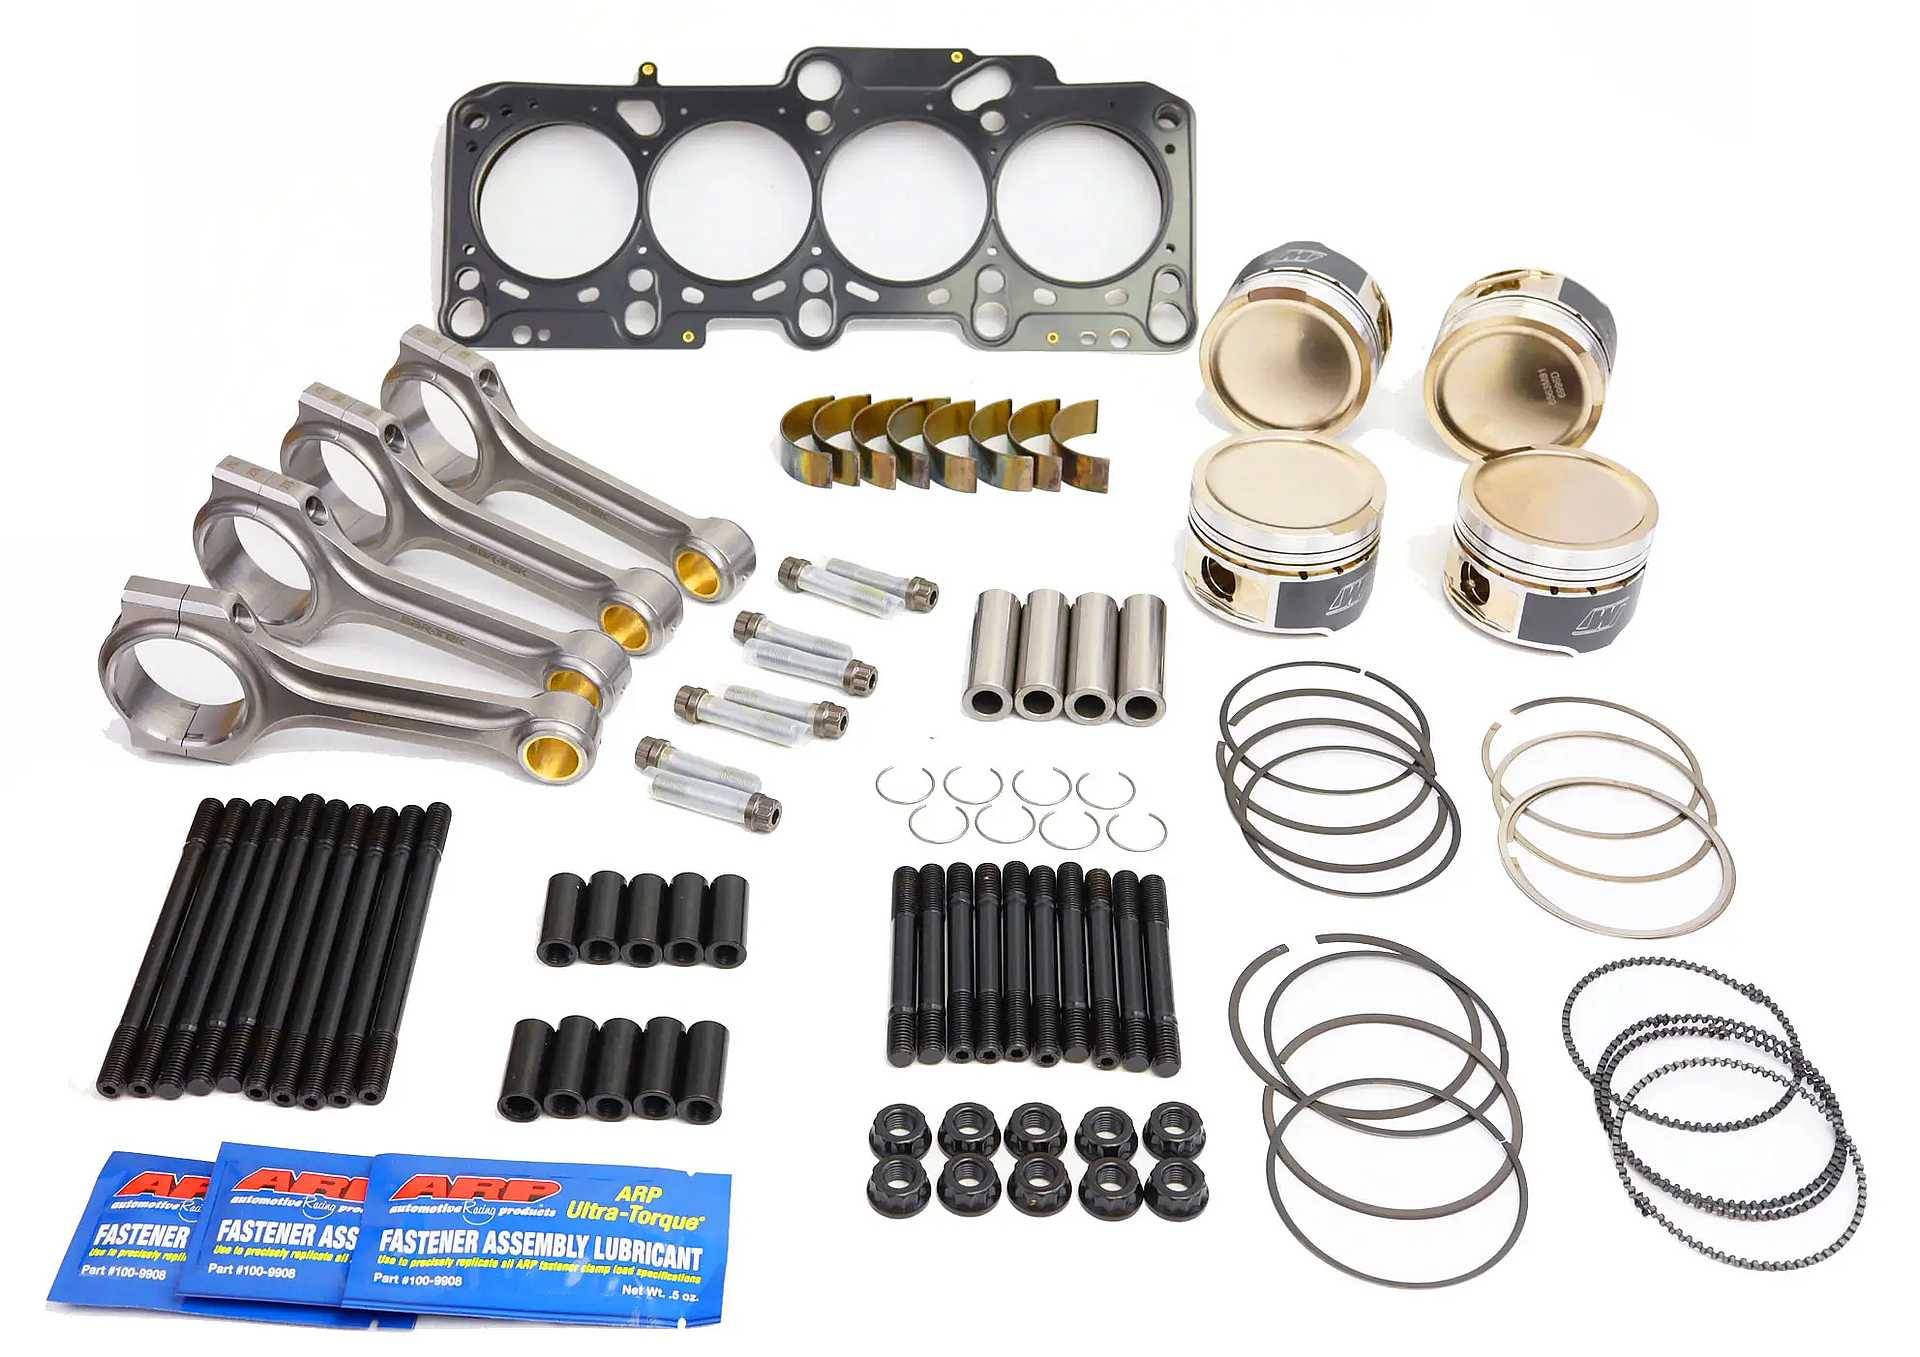 1.8T 20V Forged Piston & Steel Connecting Rod High Boost ULTI Kit Wiseco & BAR-TEK®